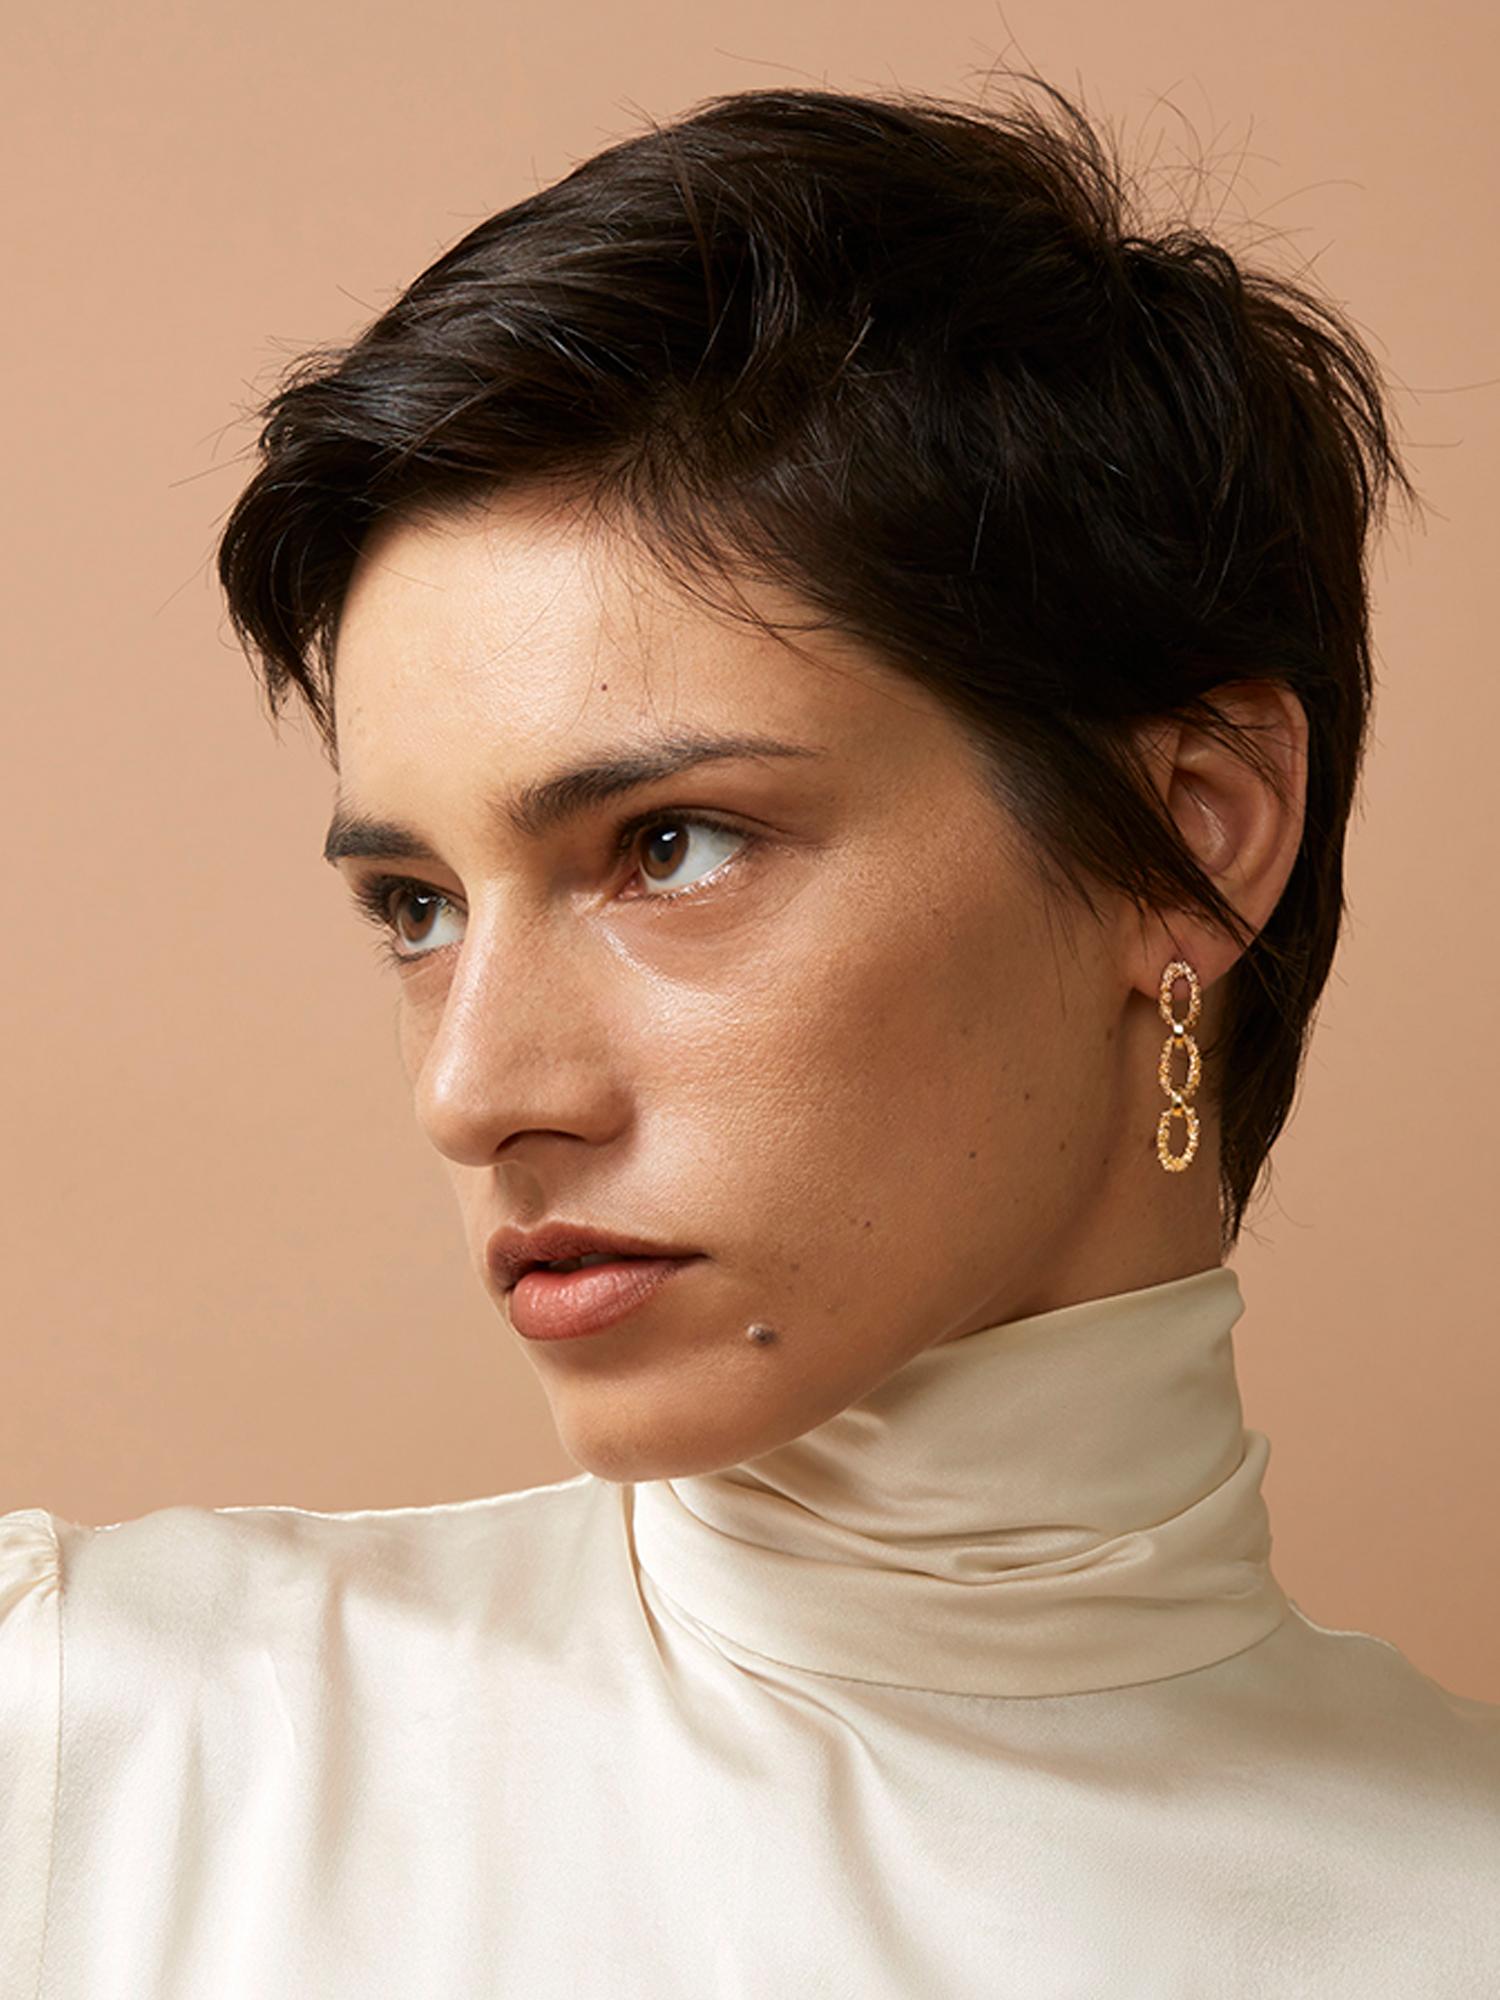 Designed with a modern edge, these unique earrings are crafted in the thousand year old technique of granulation where small spheres of gold are fused together to form and cover surfaces. Made from solid 14 karat recycled yellow gold, these post